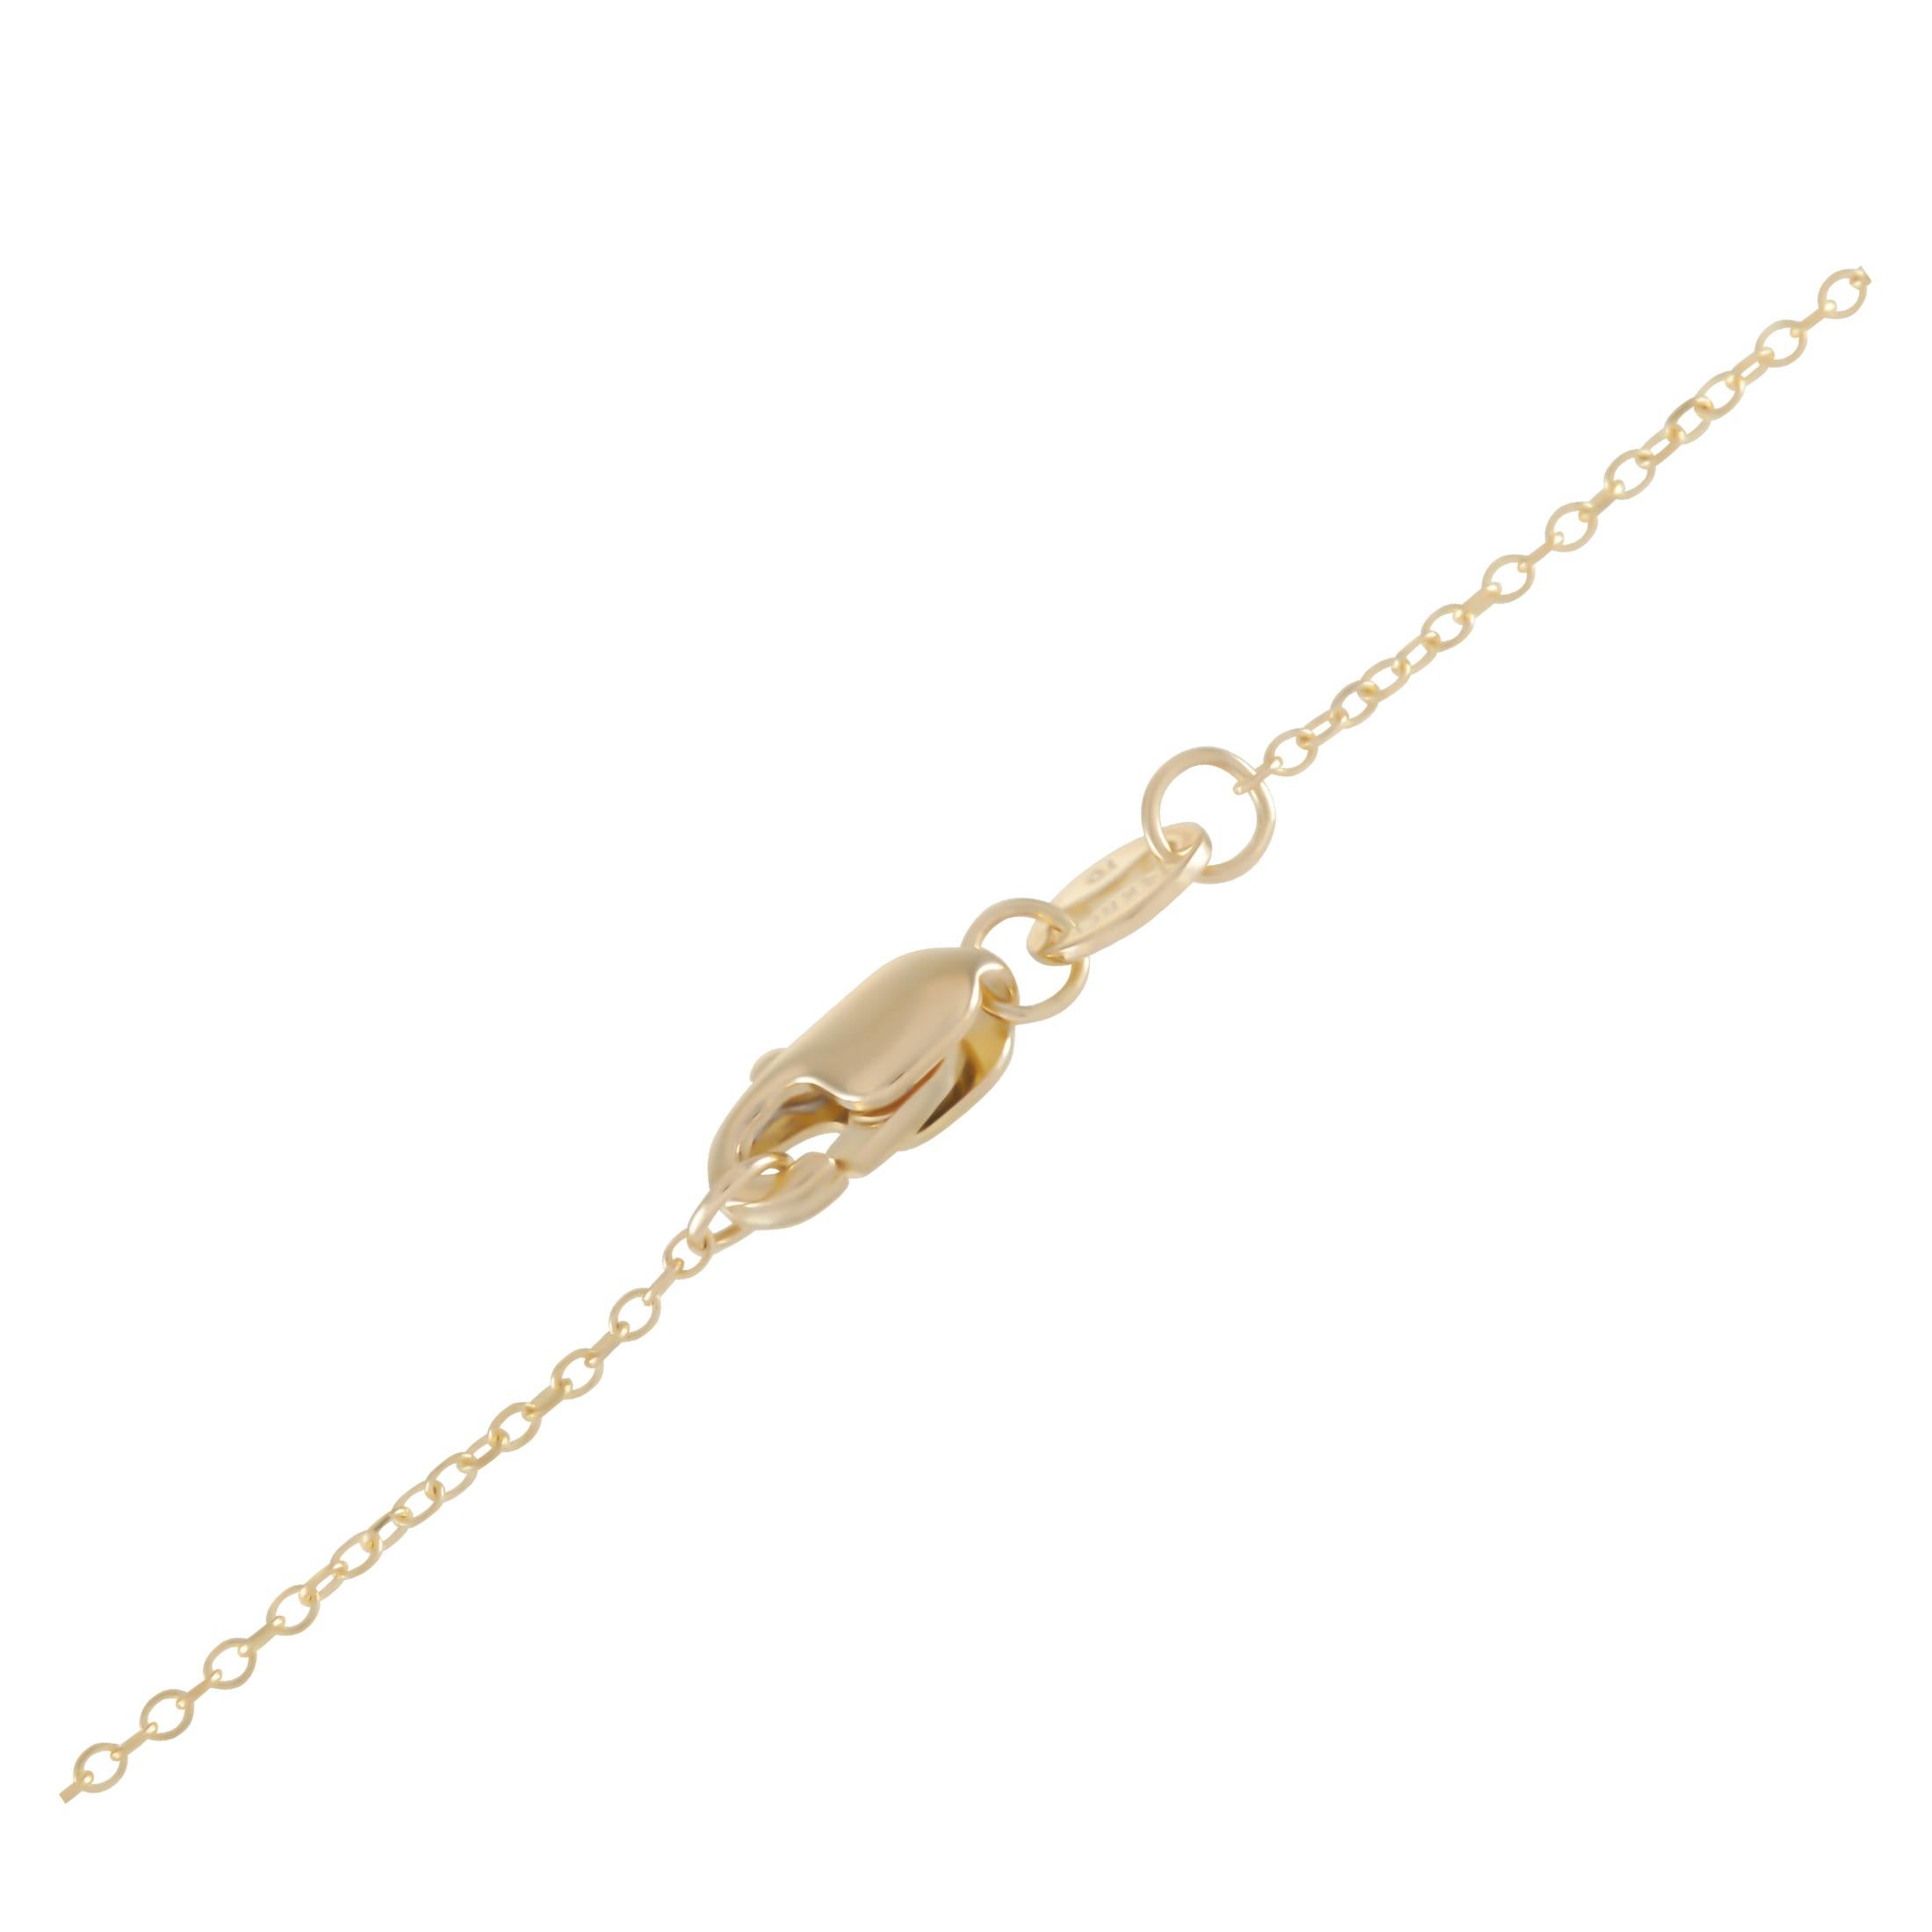 Round Cut Lb Exclusive 14k Yellow Gold 0.15 Carat Diamond Bar Necklace For Sale